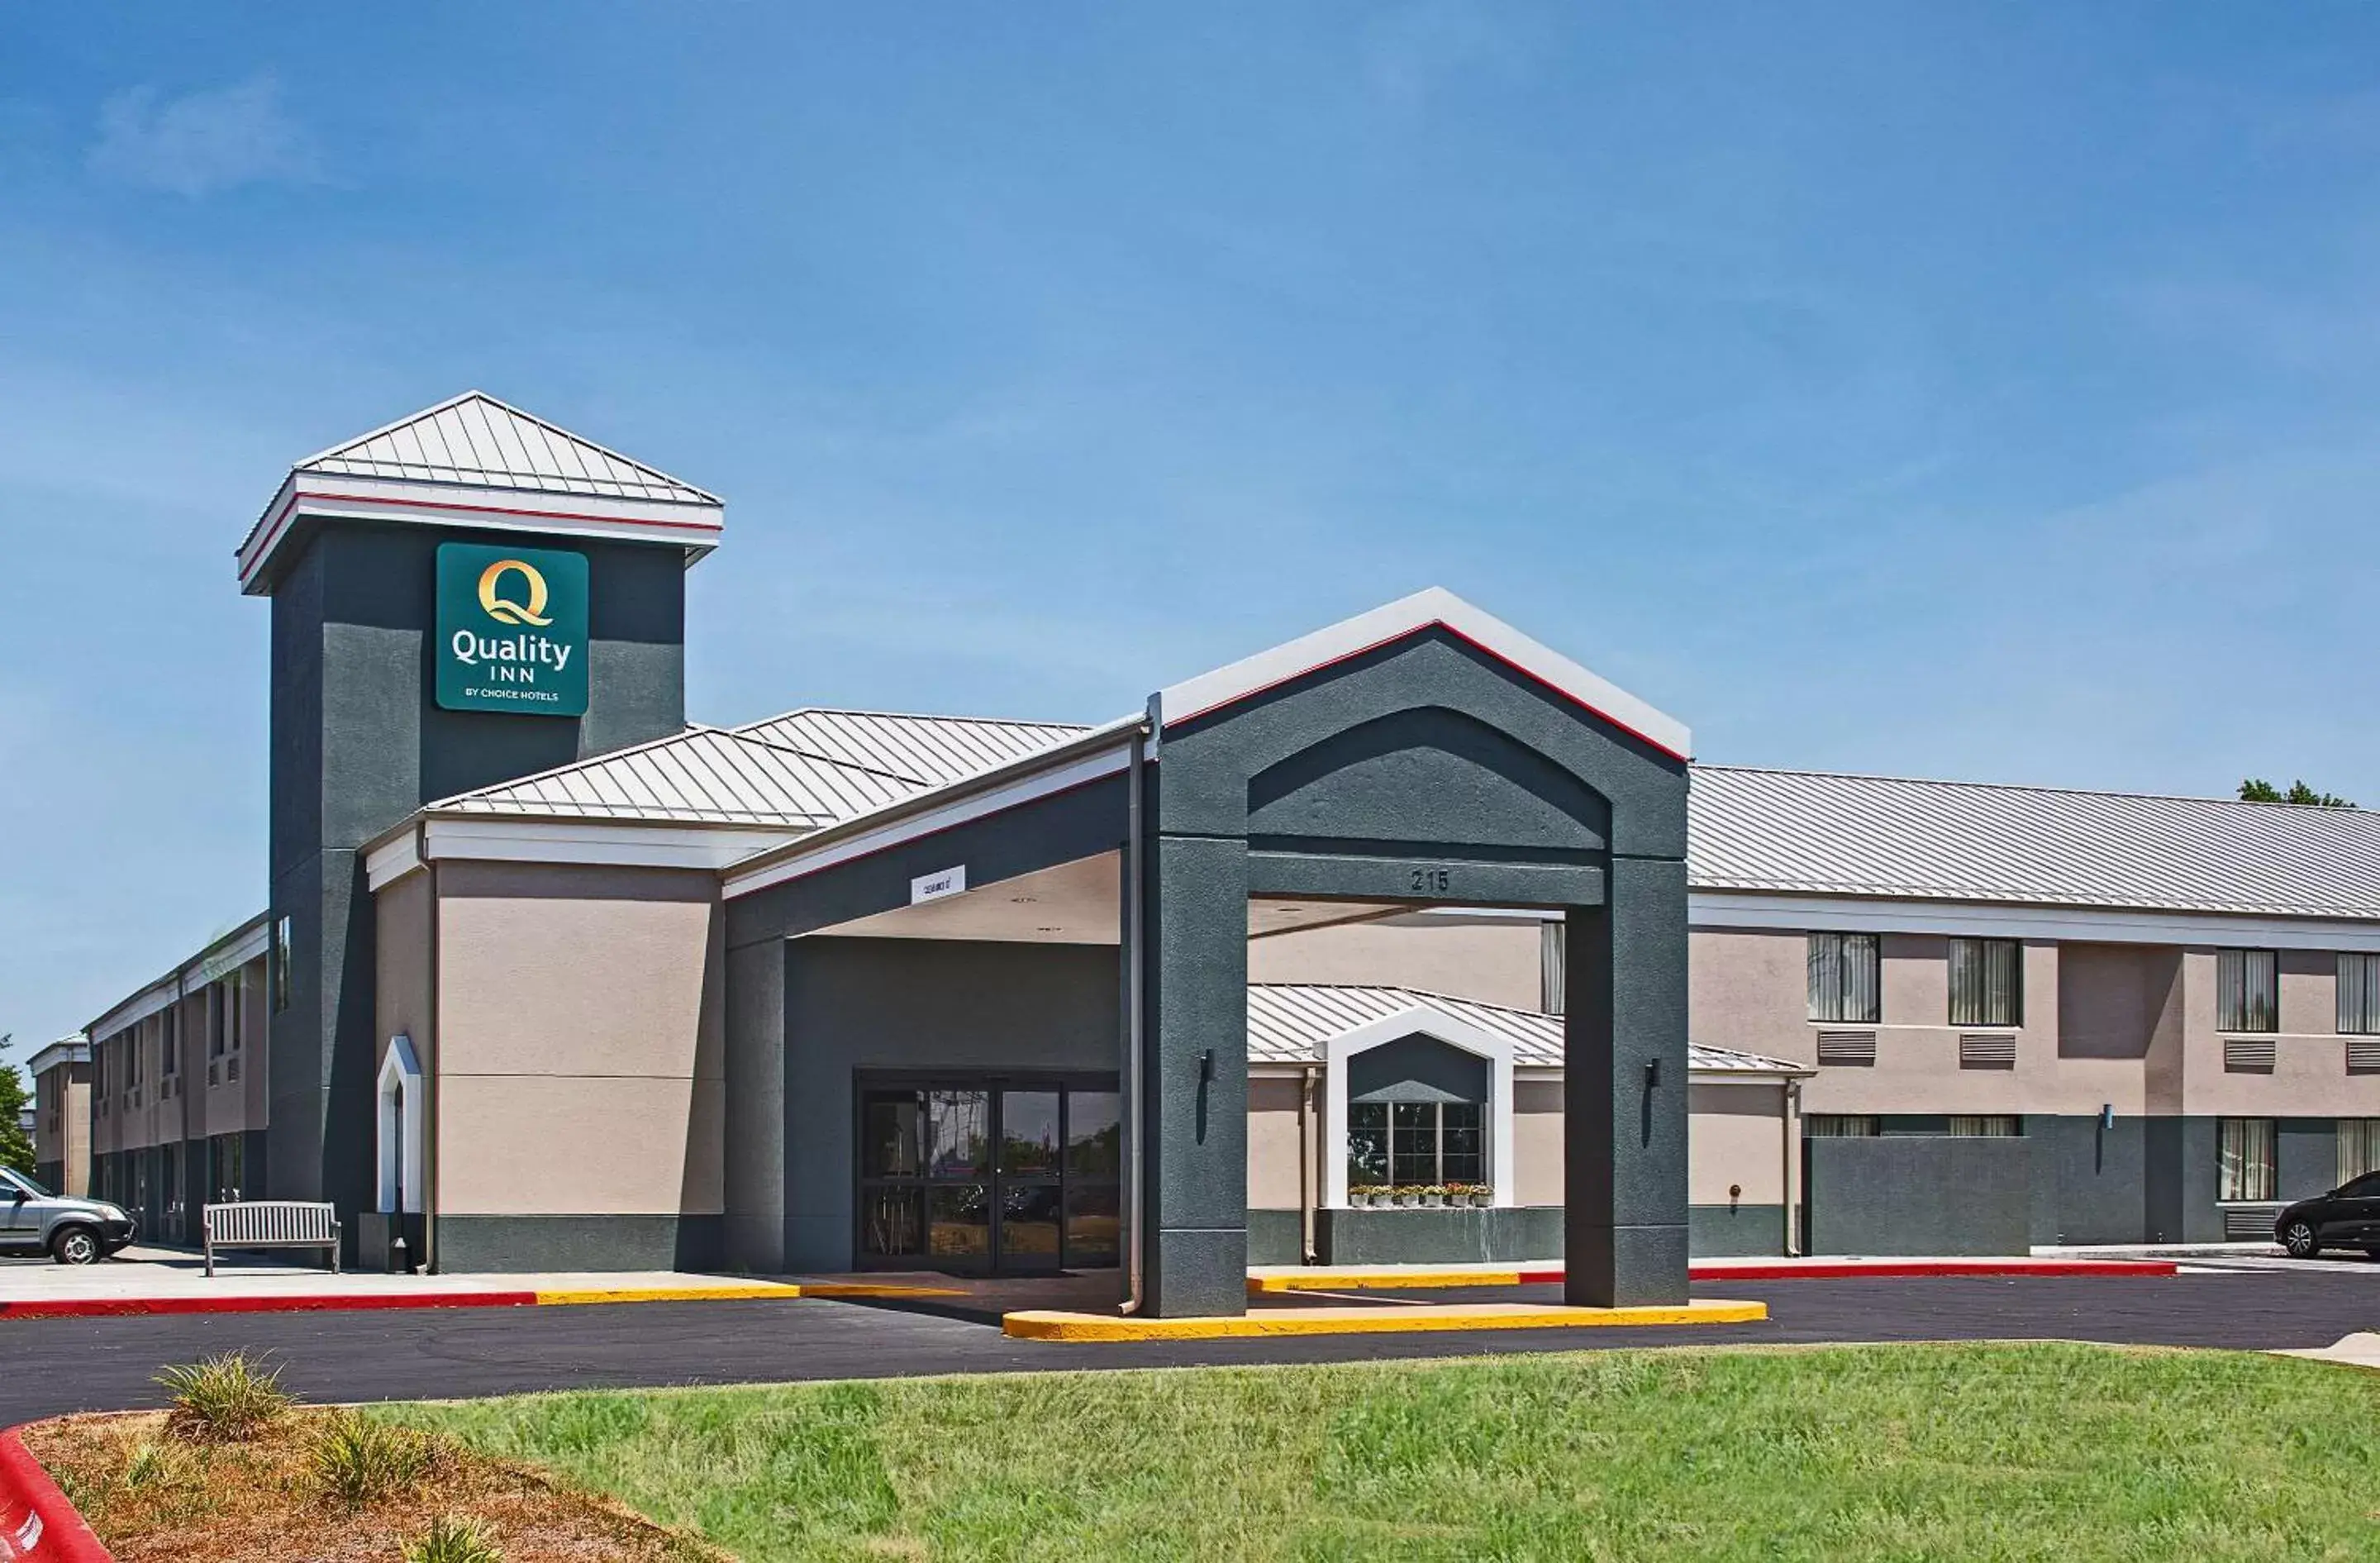 Property Building in Quality Inn Bentonville-Rogers